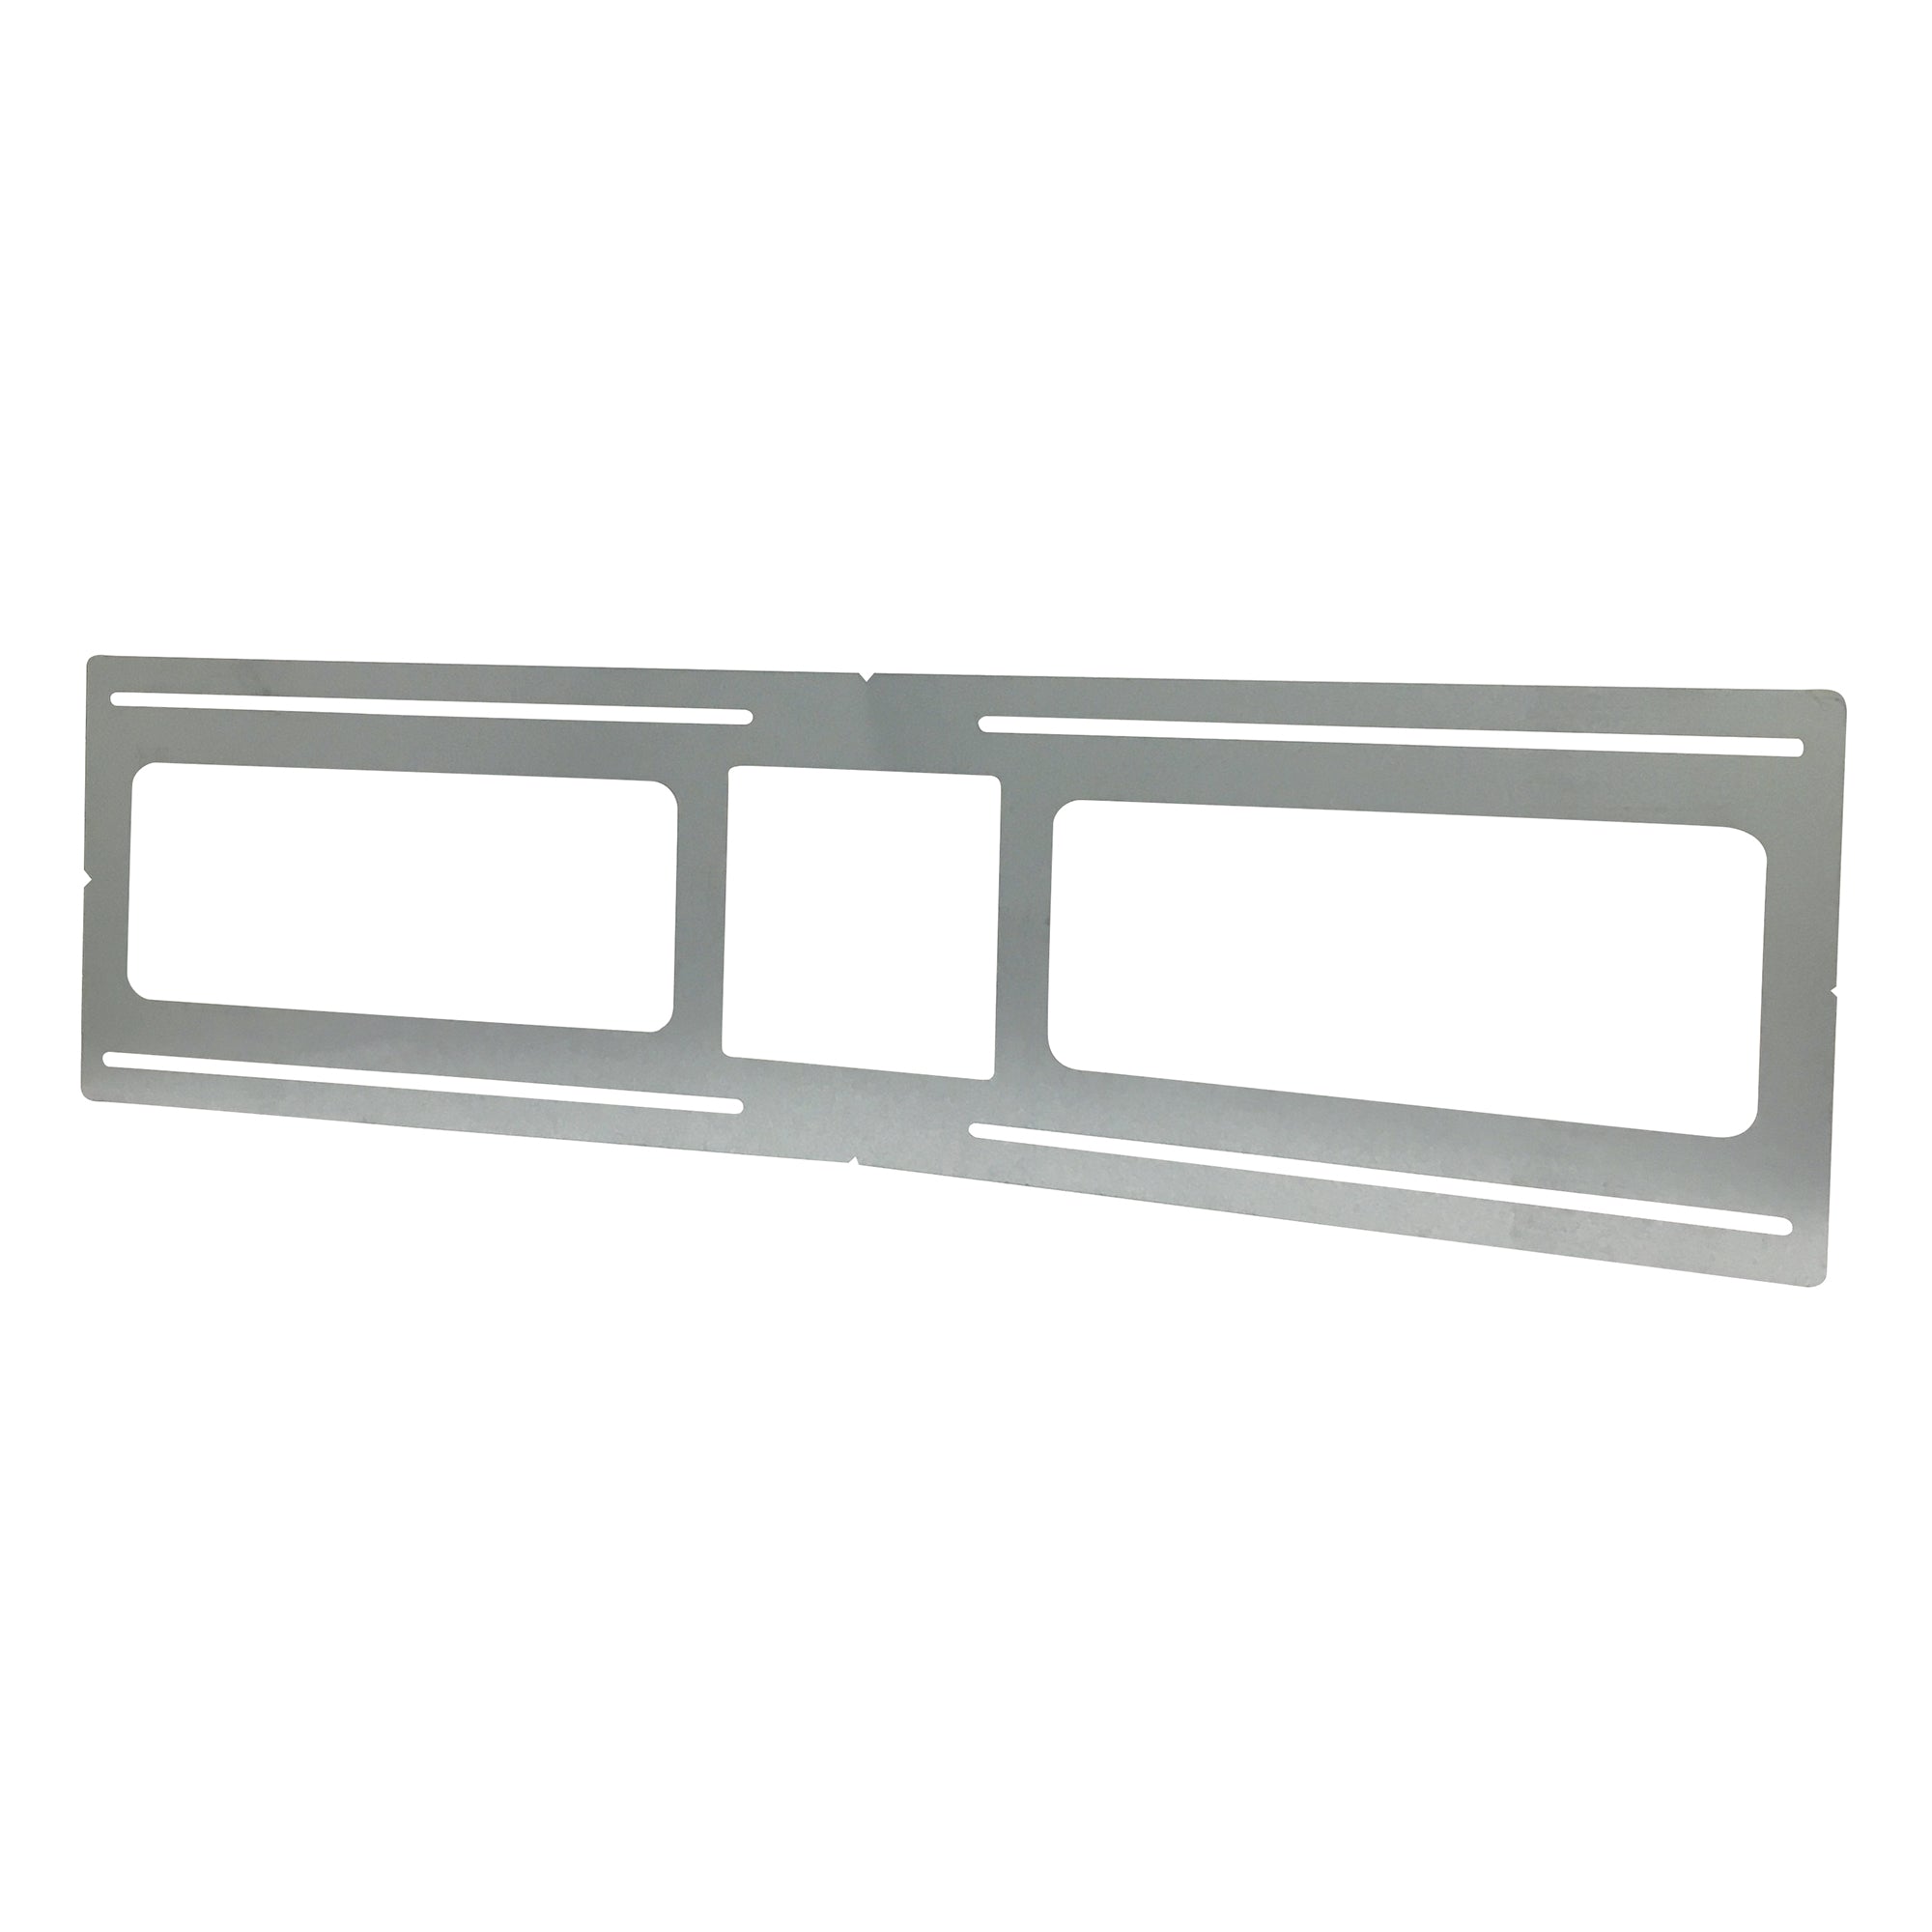 Nora Lighting NFP-S425 - Recessed - New Construction Plate for 4 Inch Square Can-less Downlights